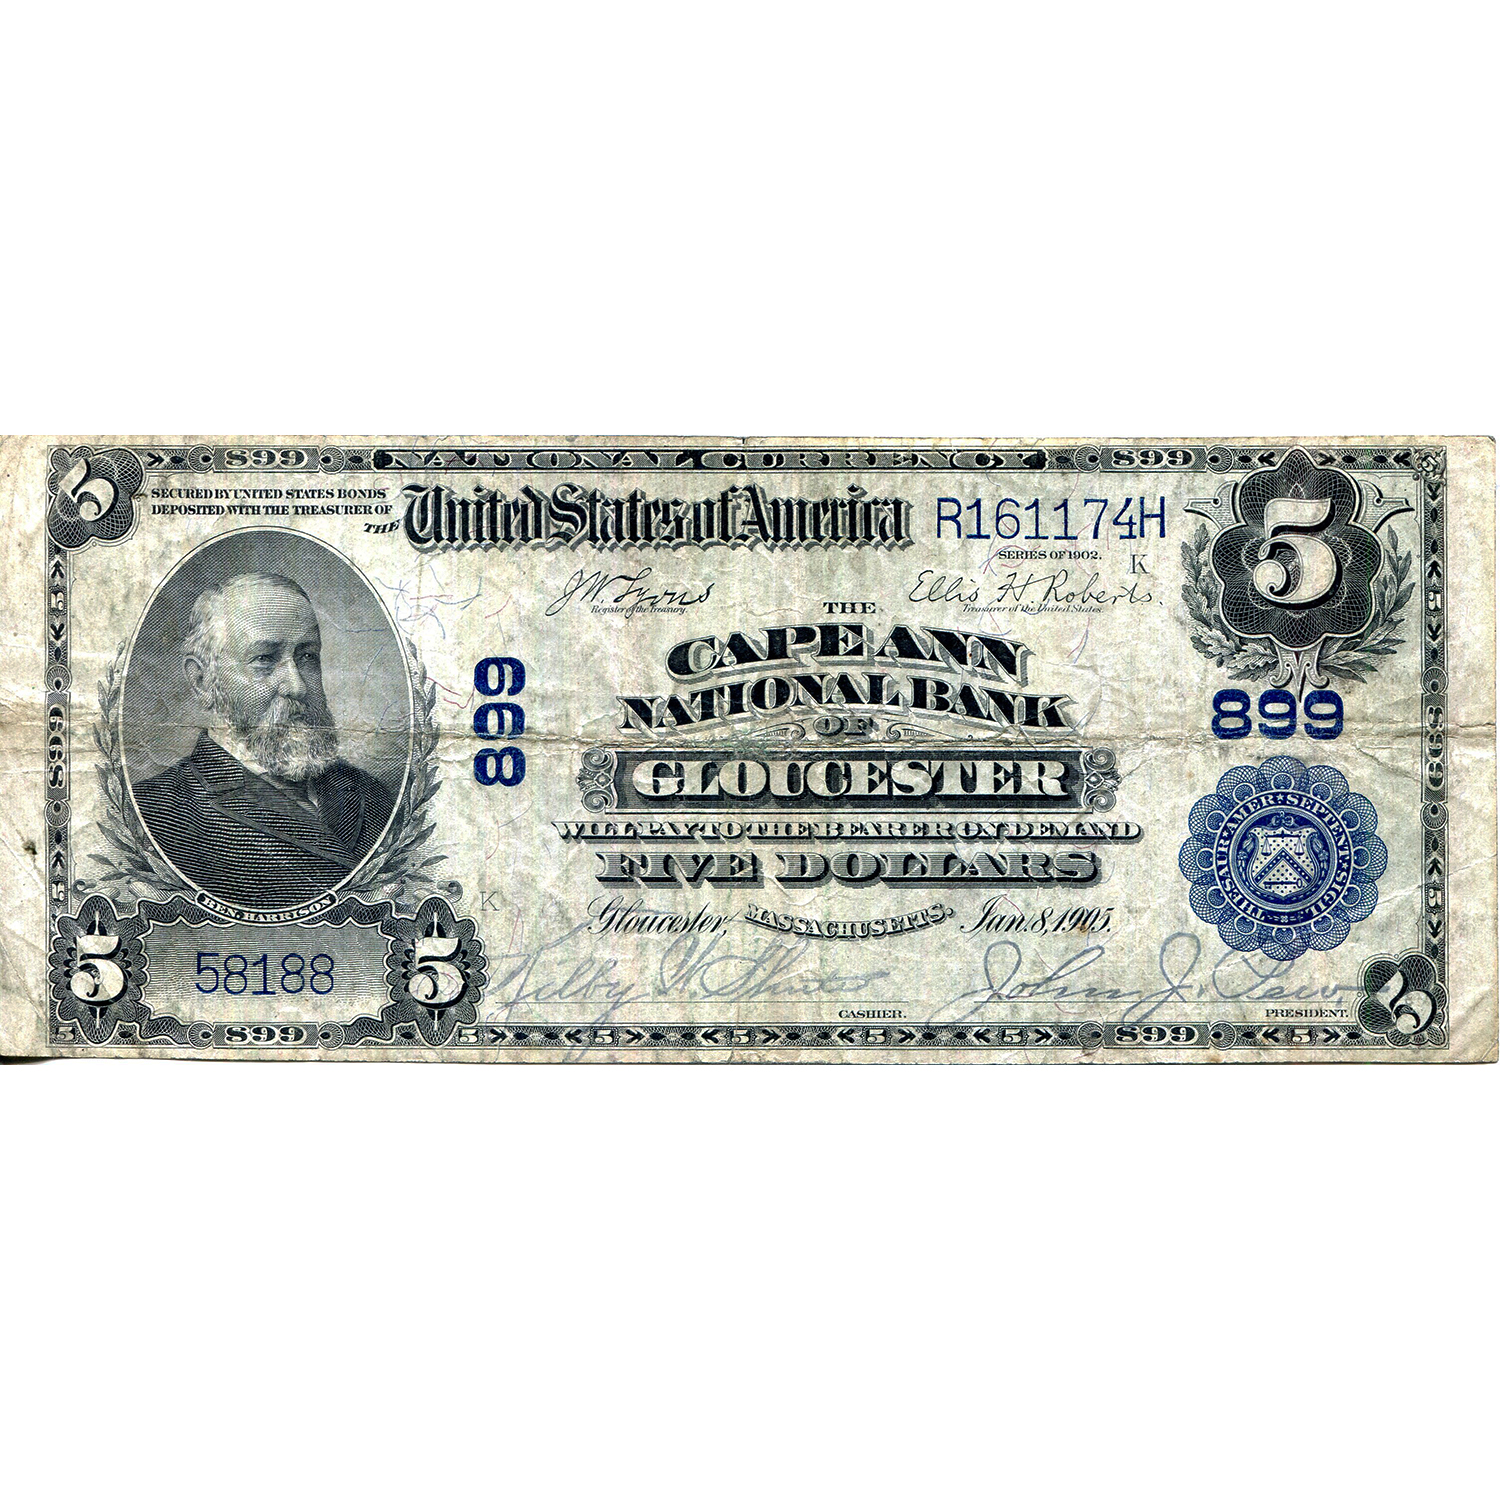 1902 $5 National Bank Note Gloucester MA Charter #899 F